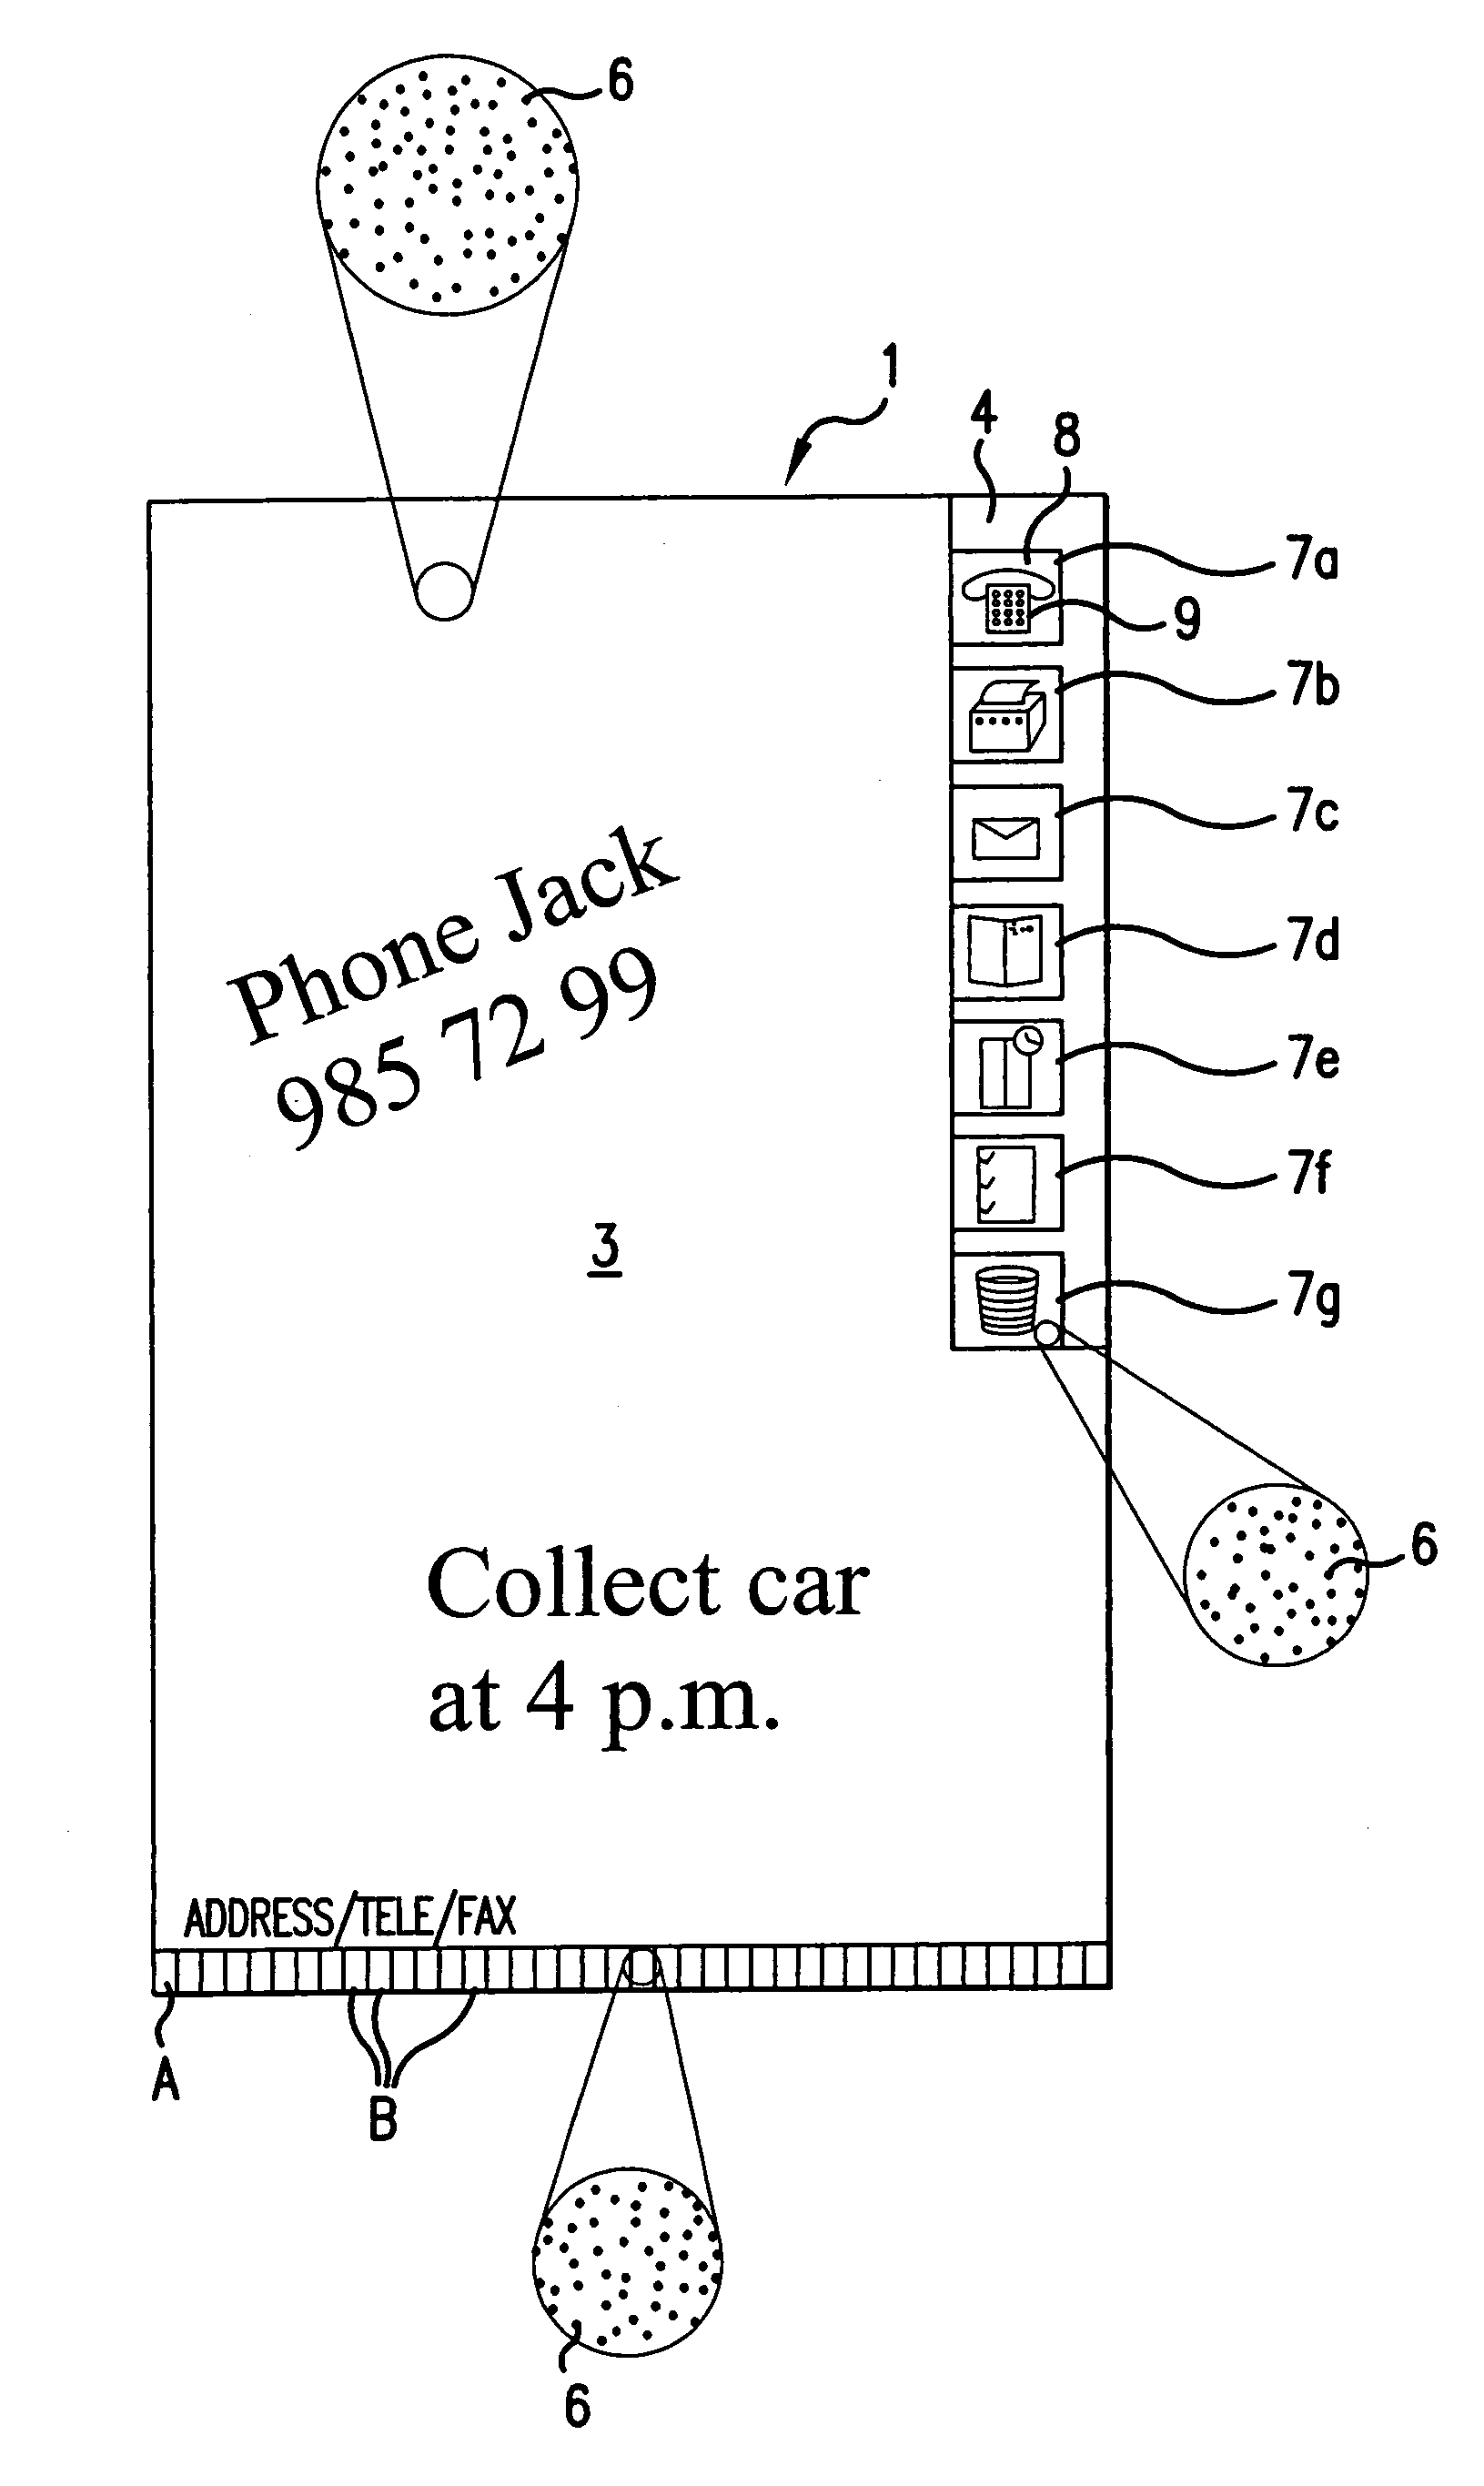 Position code bearing notepad employing activation icons